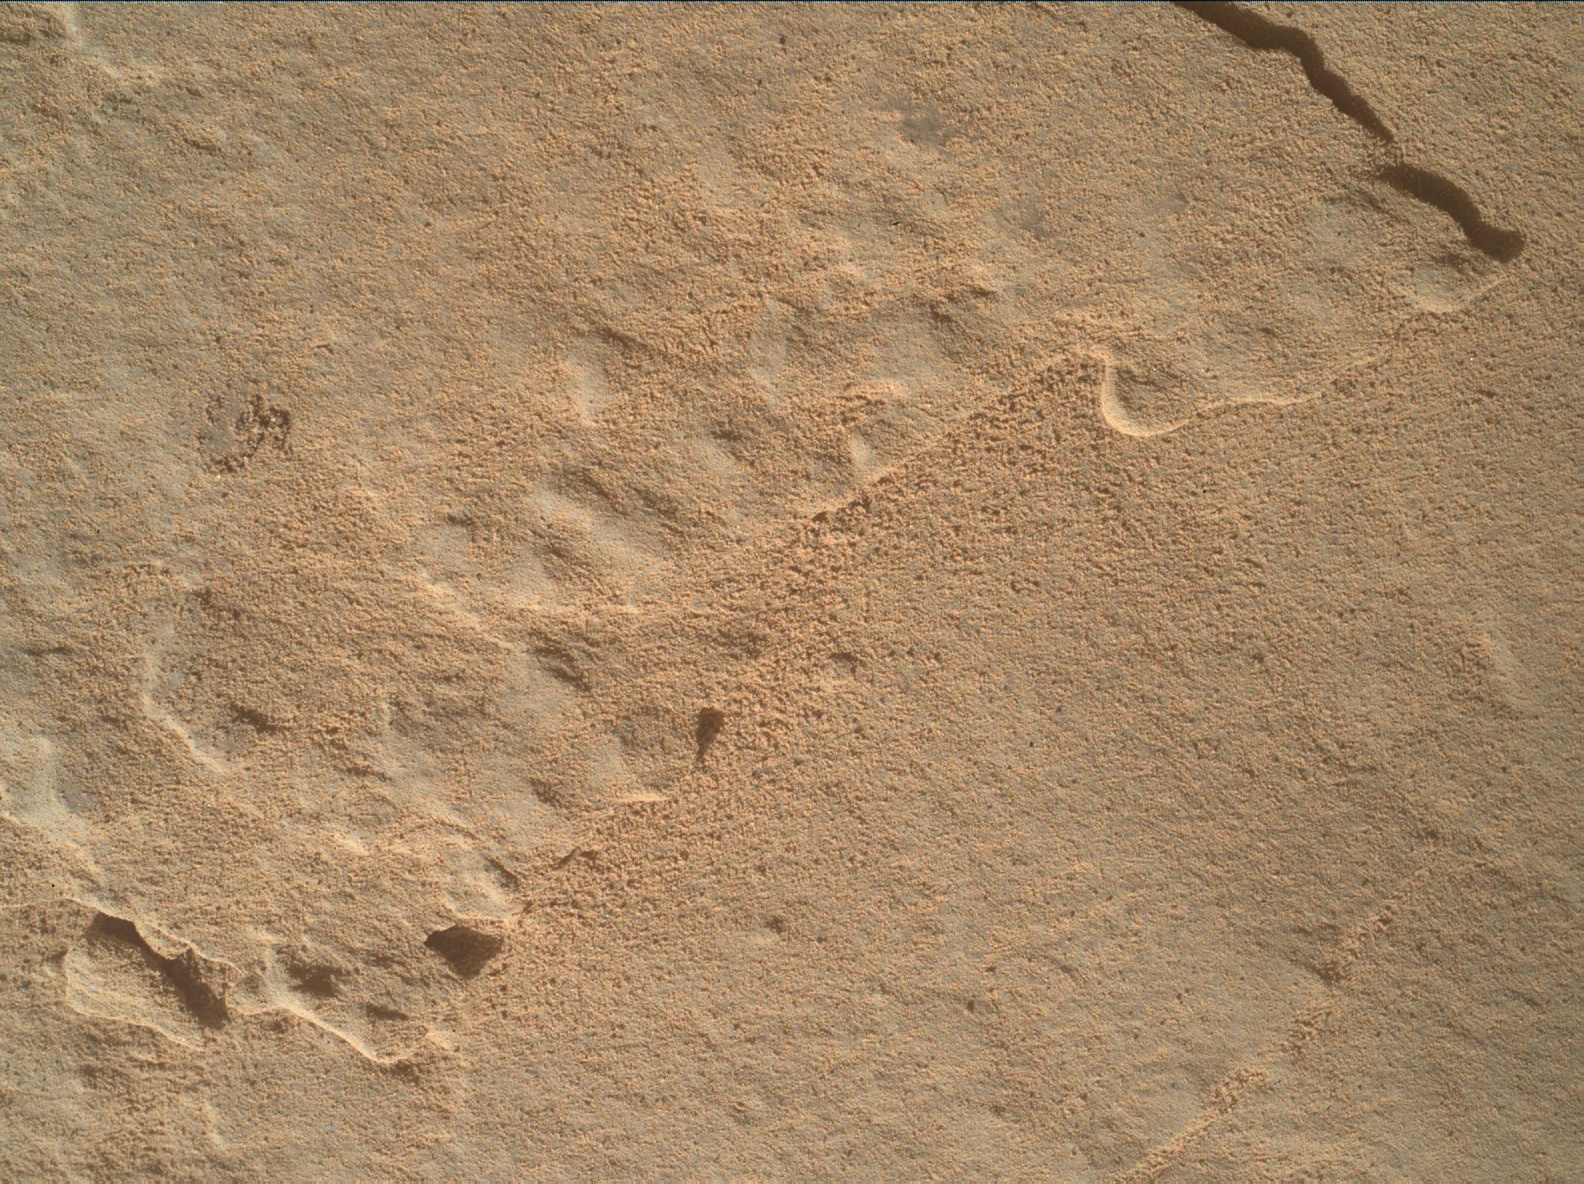 Nasa's Mars rover Curiosity acquired this image using its Mars Hand Lens Imager (MAHLI) on Sol 3962